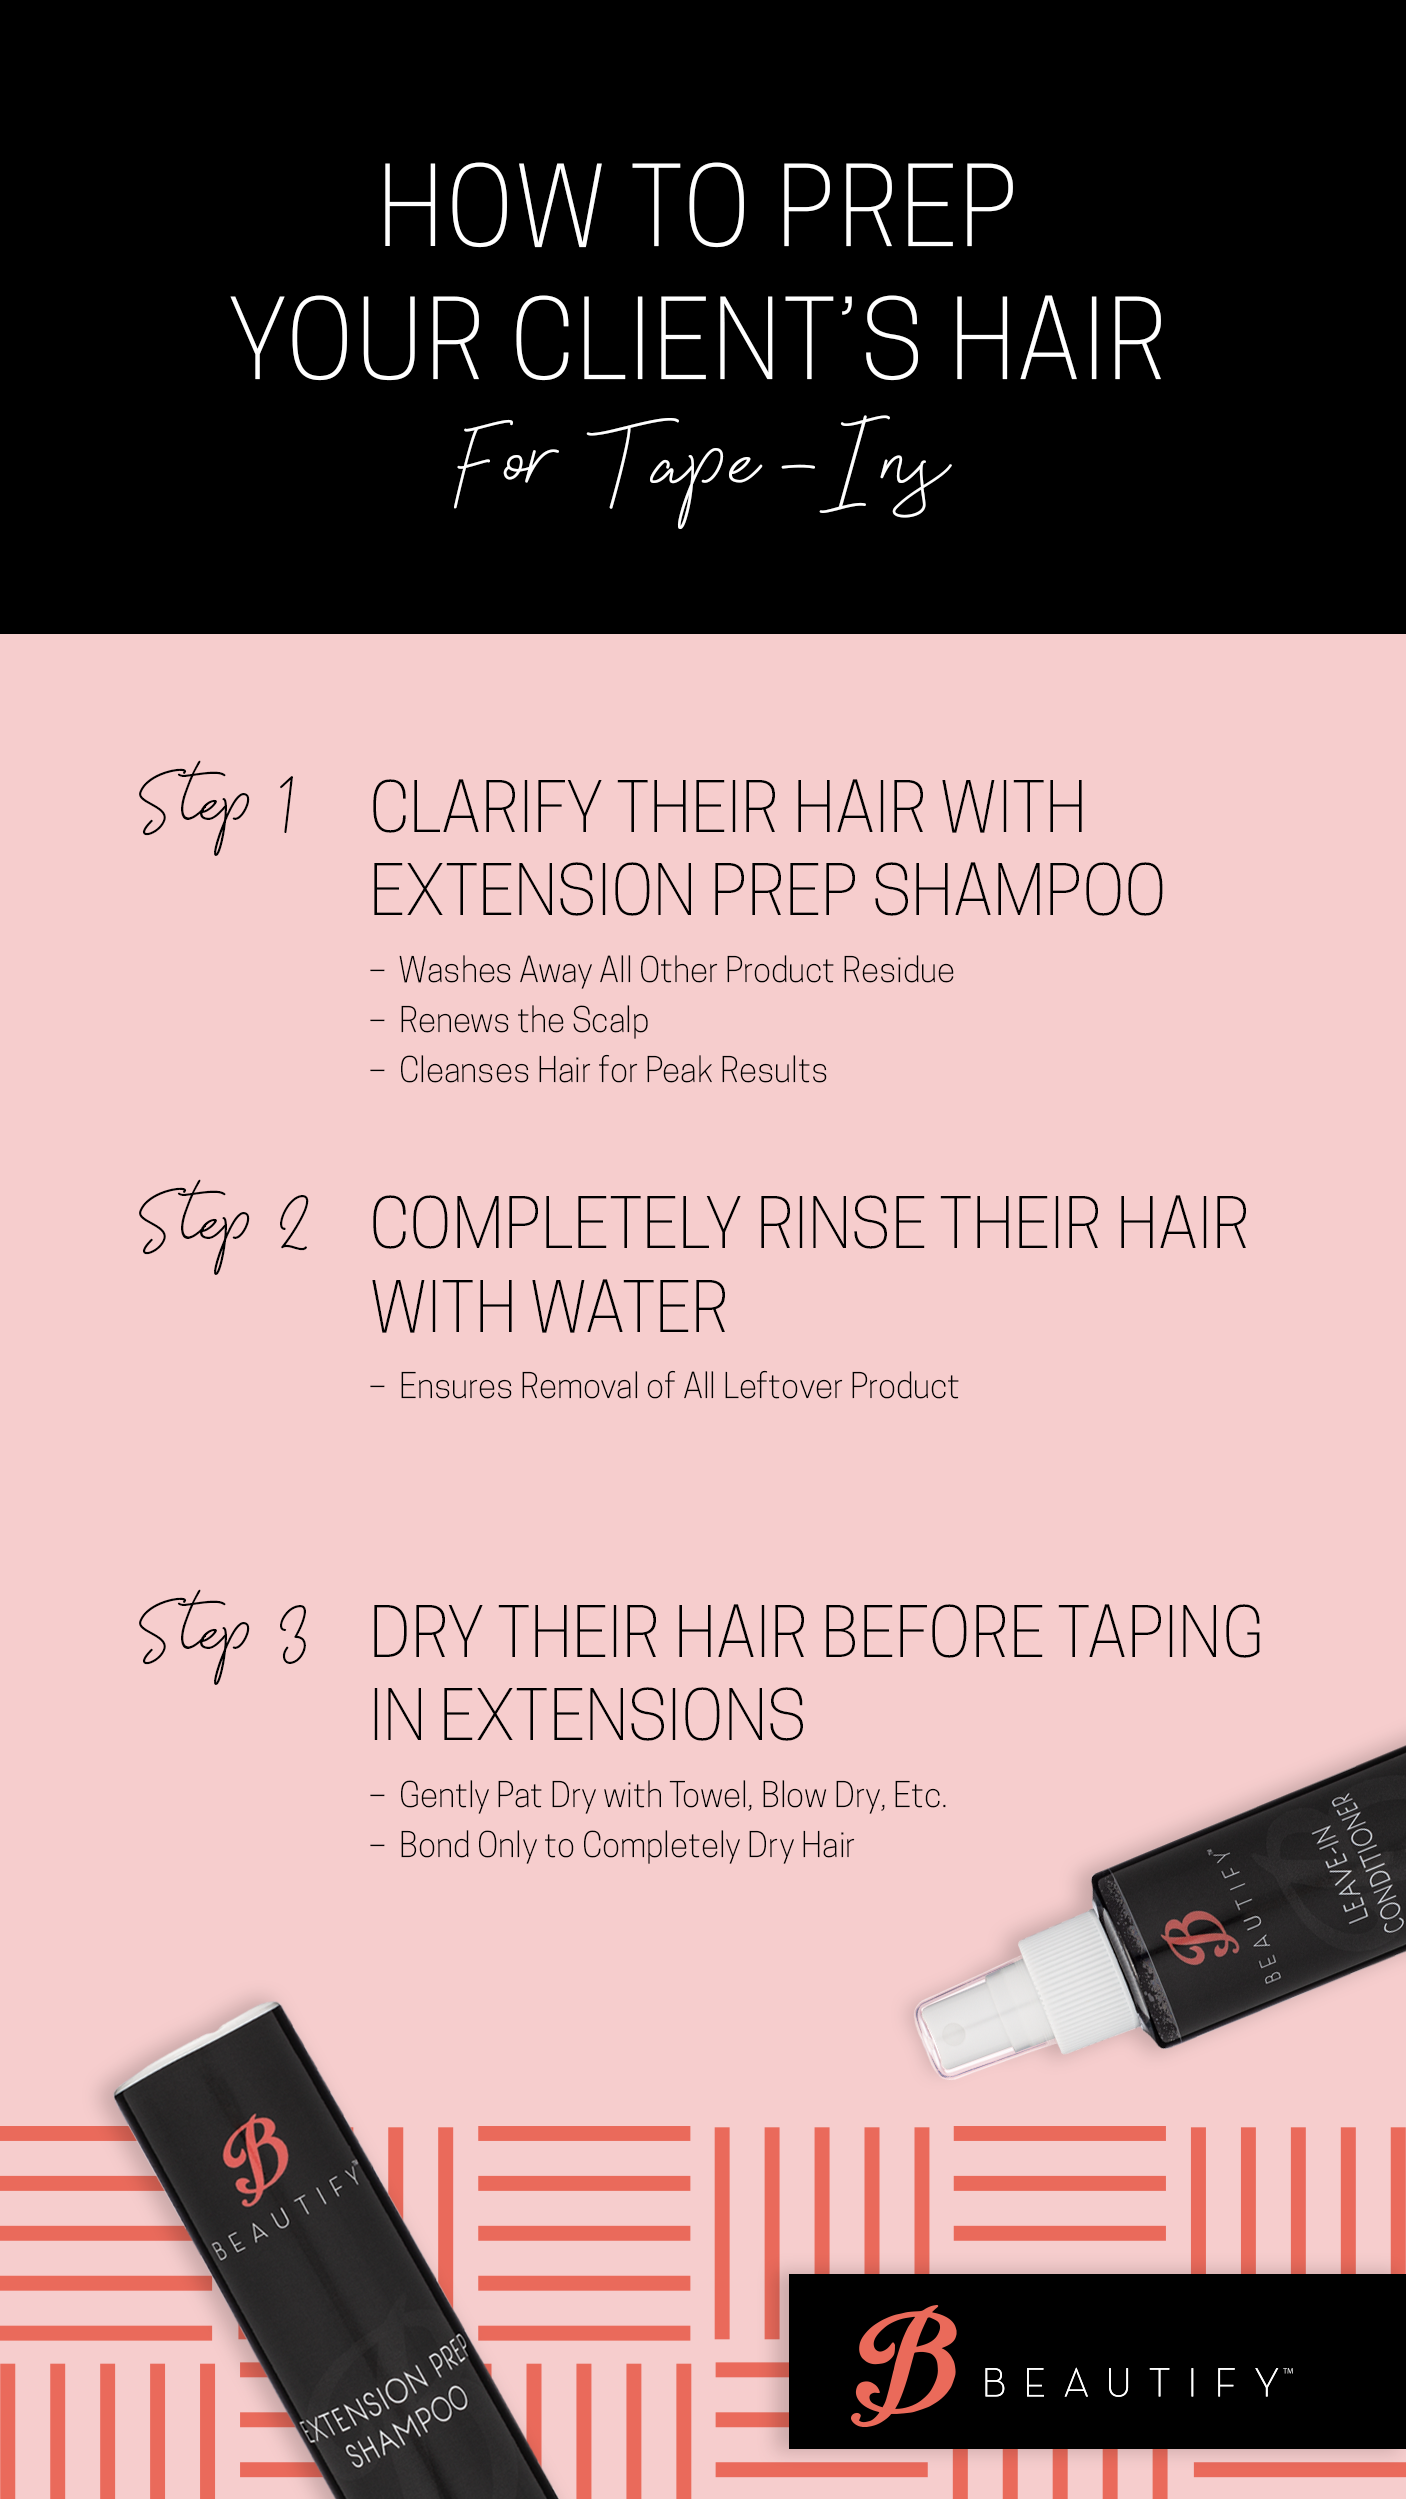 How To Prep Hair for Extensions